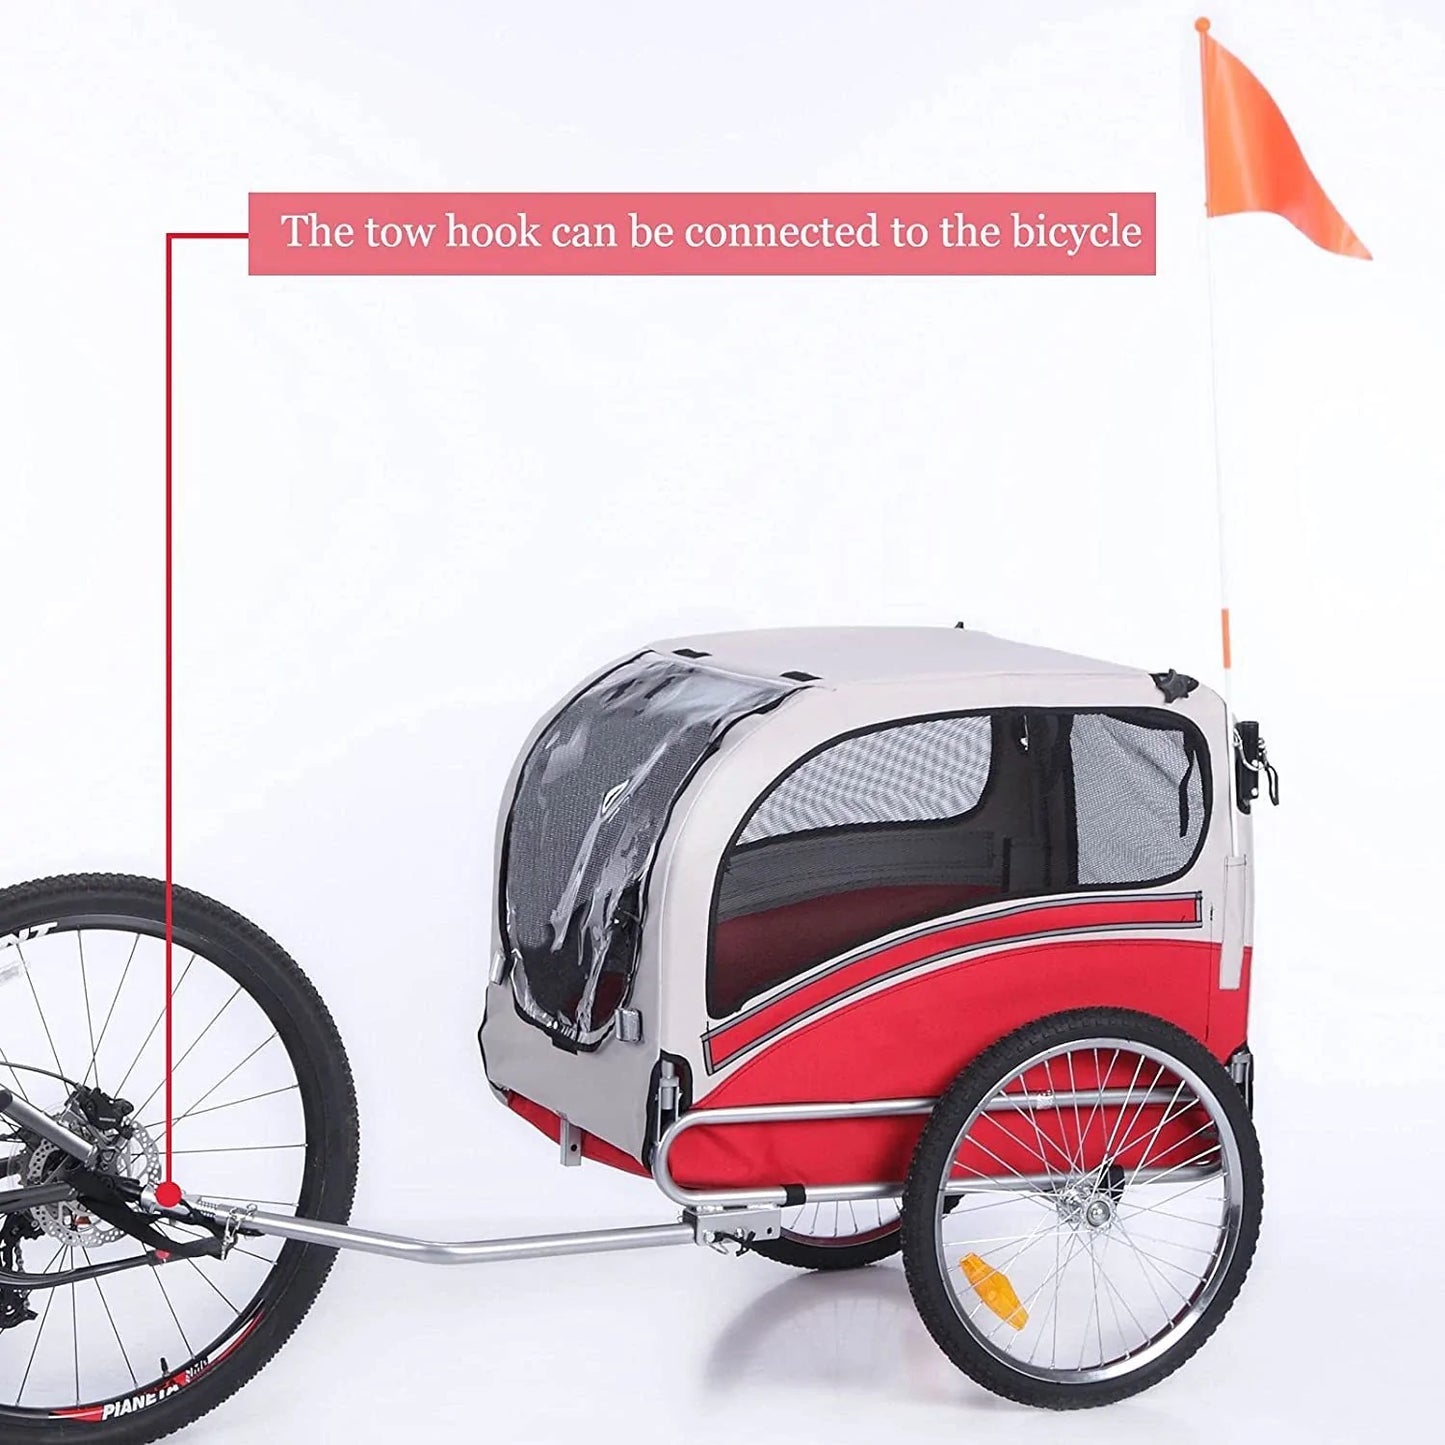 Pet Bicycle Trailer 2 in1 in Red